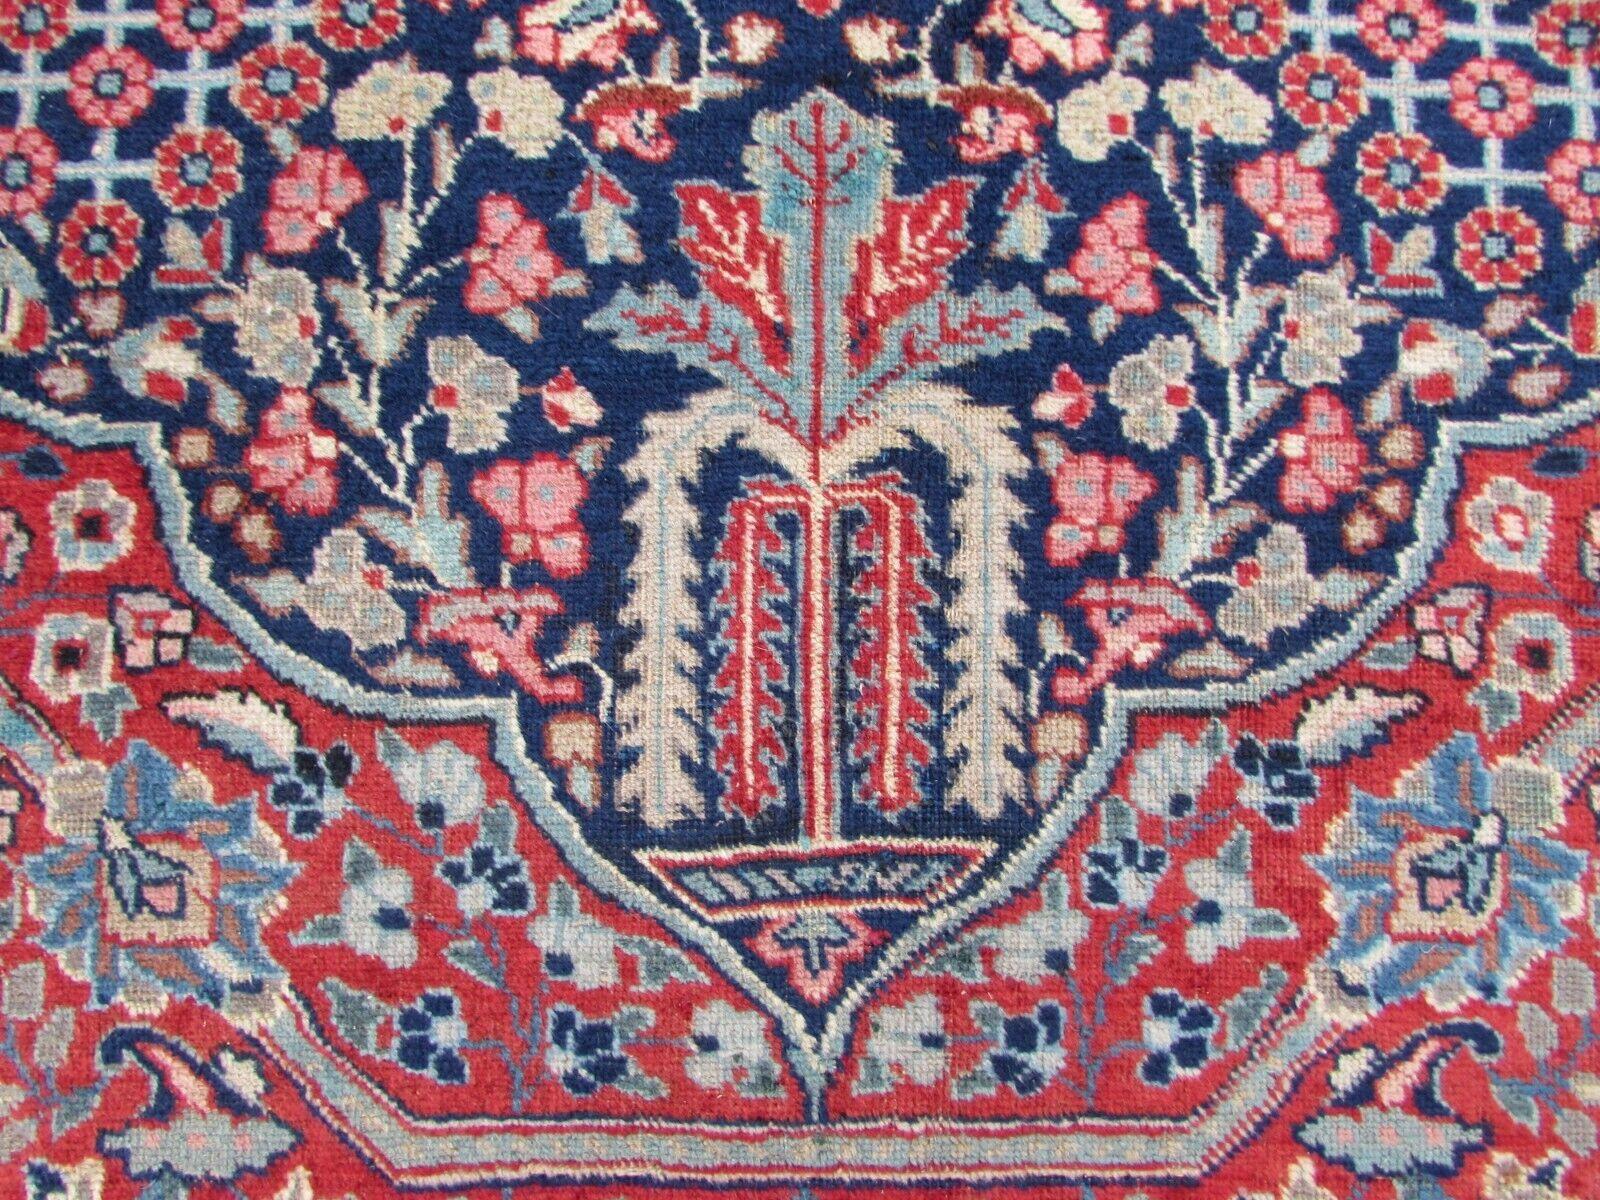 Late 20th Century Handmade Vintage Persian Style Kazvin Rug 9.3' x 12.3', 1970s - 1Q68 For Sale